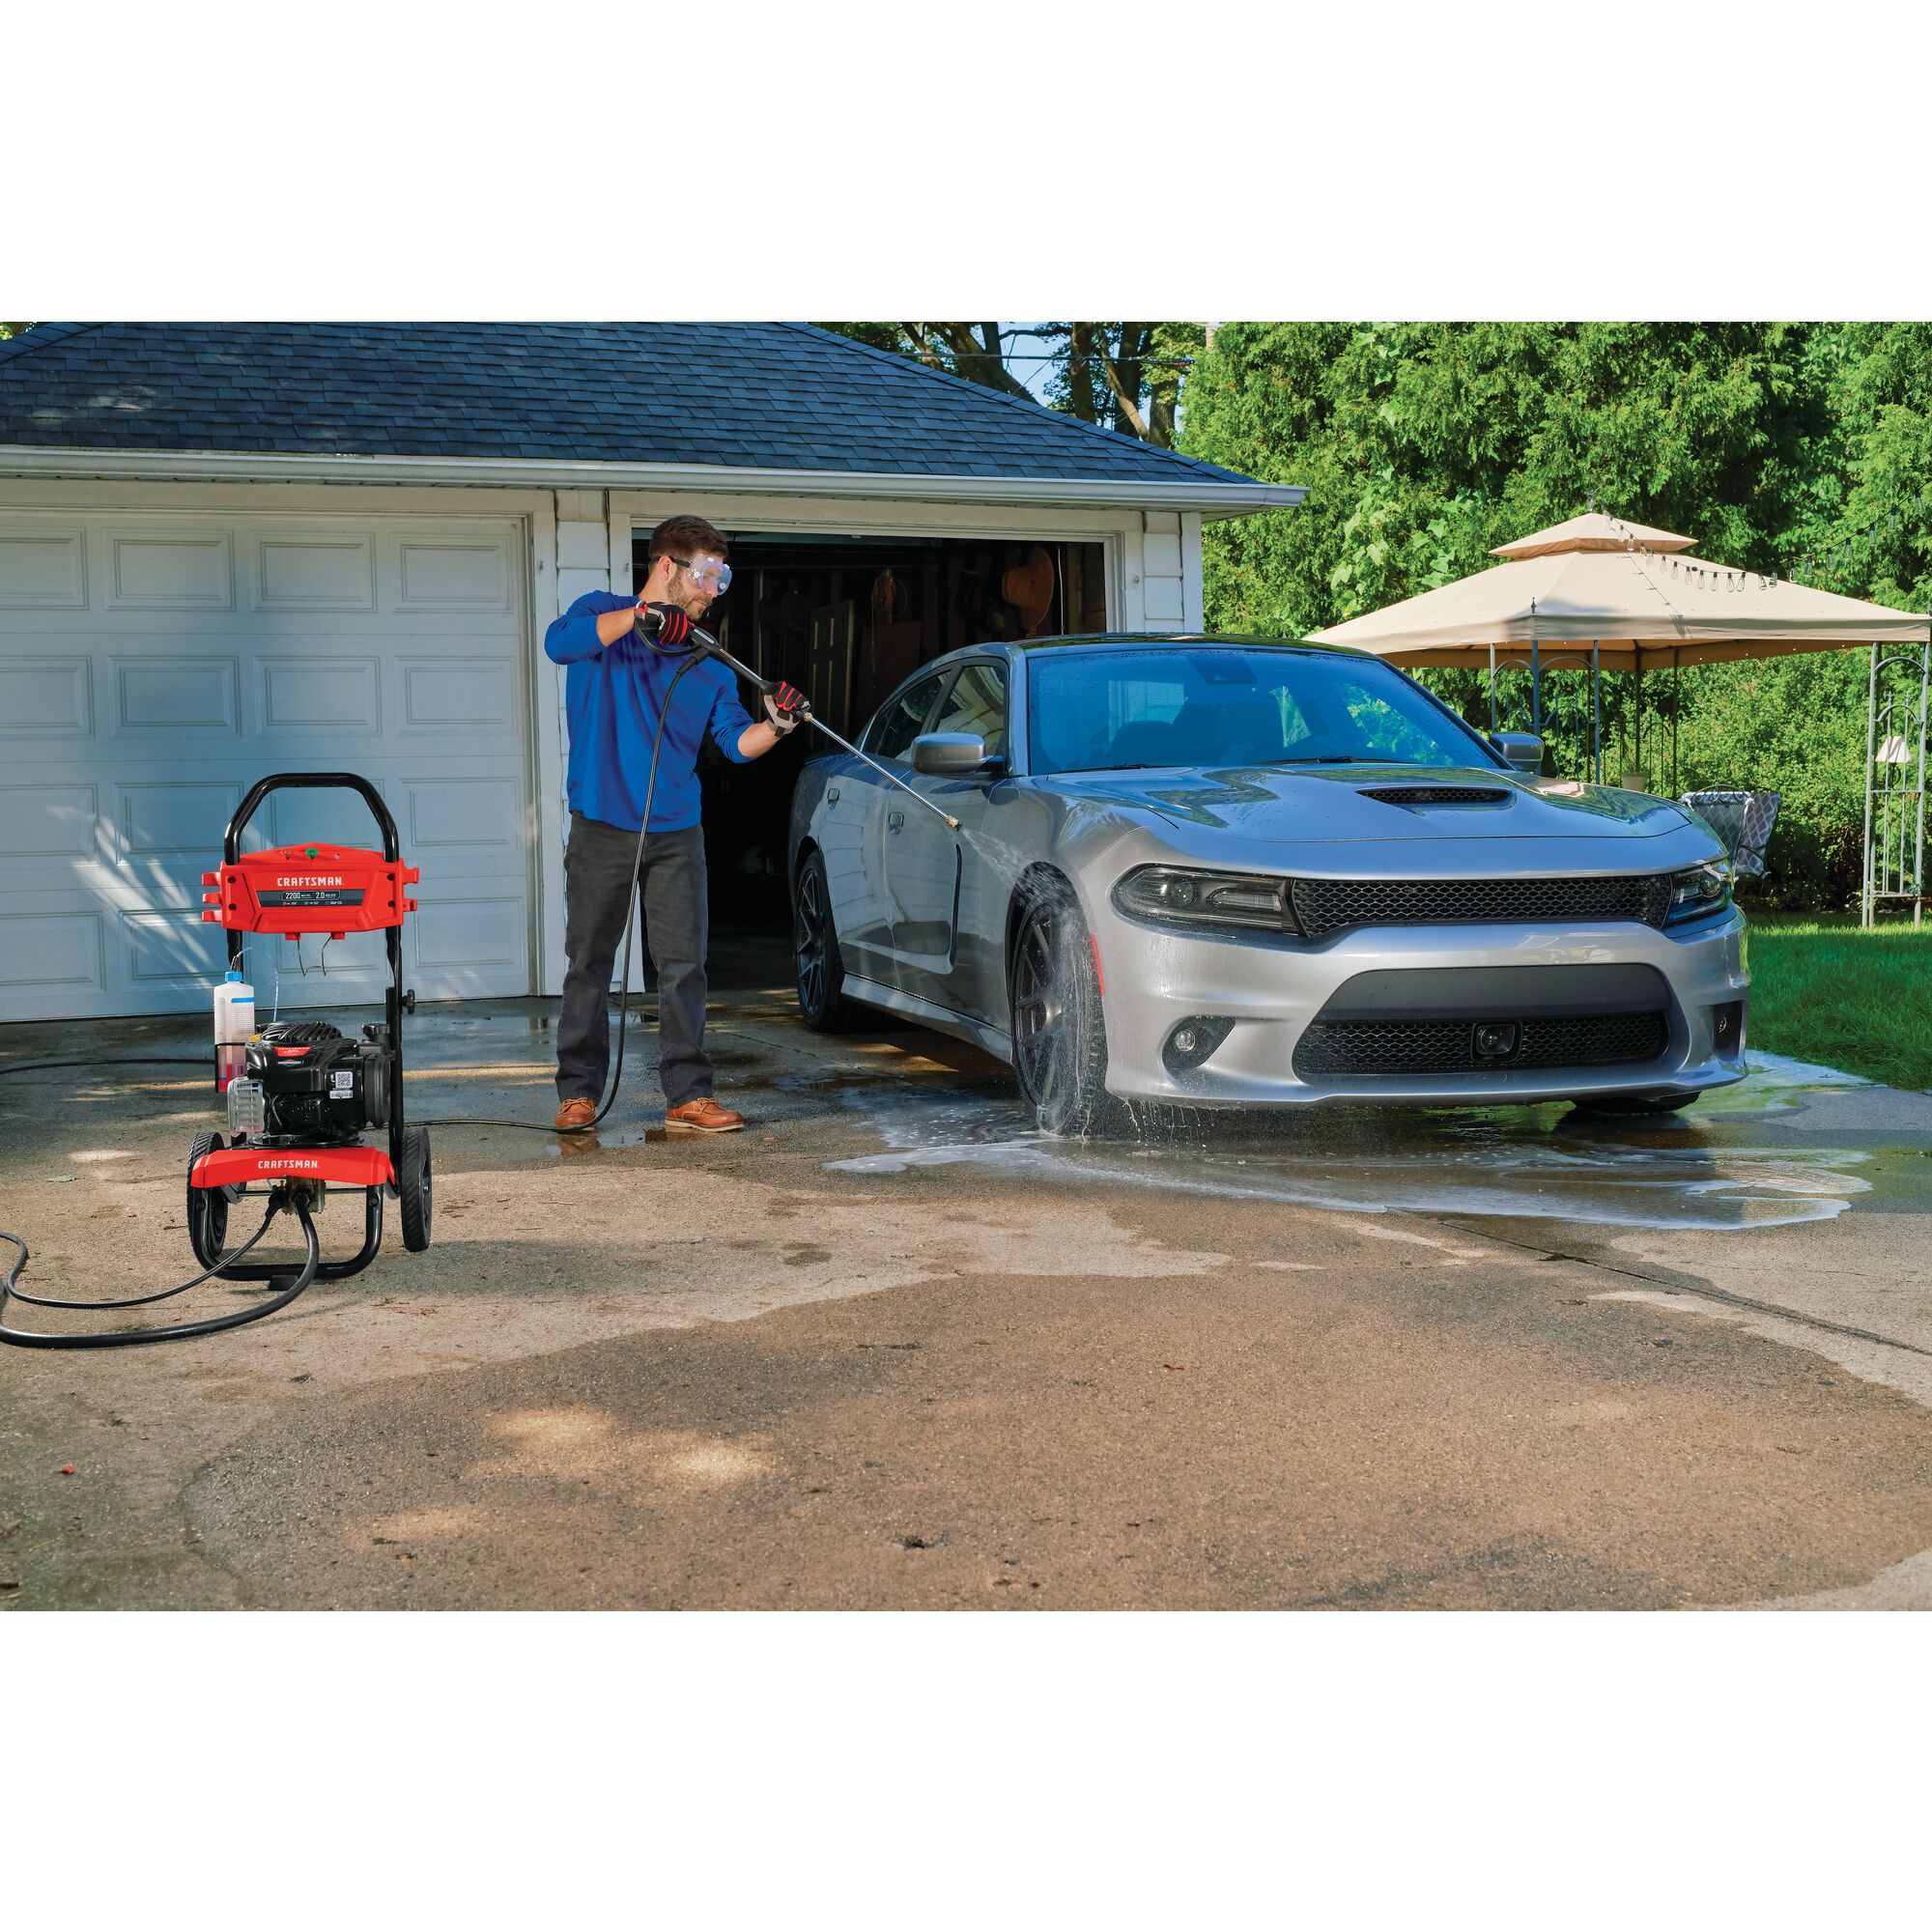 2200 MAX Pounds per Square Inch or 2 MAX Gallons Per Minute Pressure Washer being used by person to wash car tires outdoors.